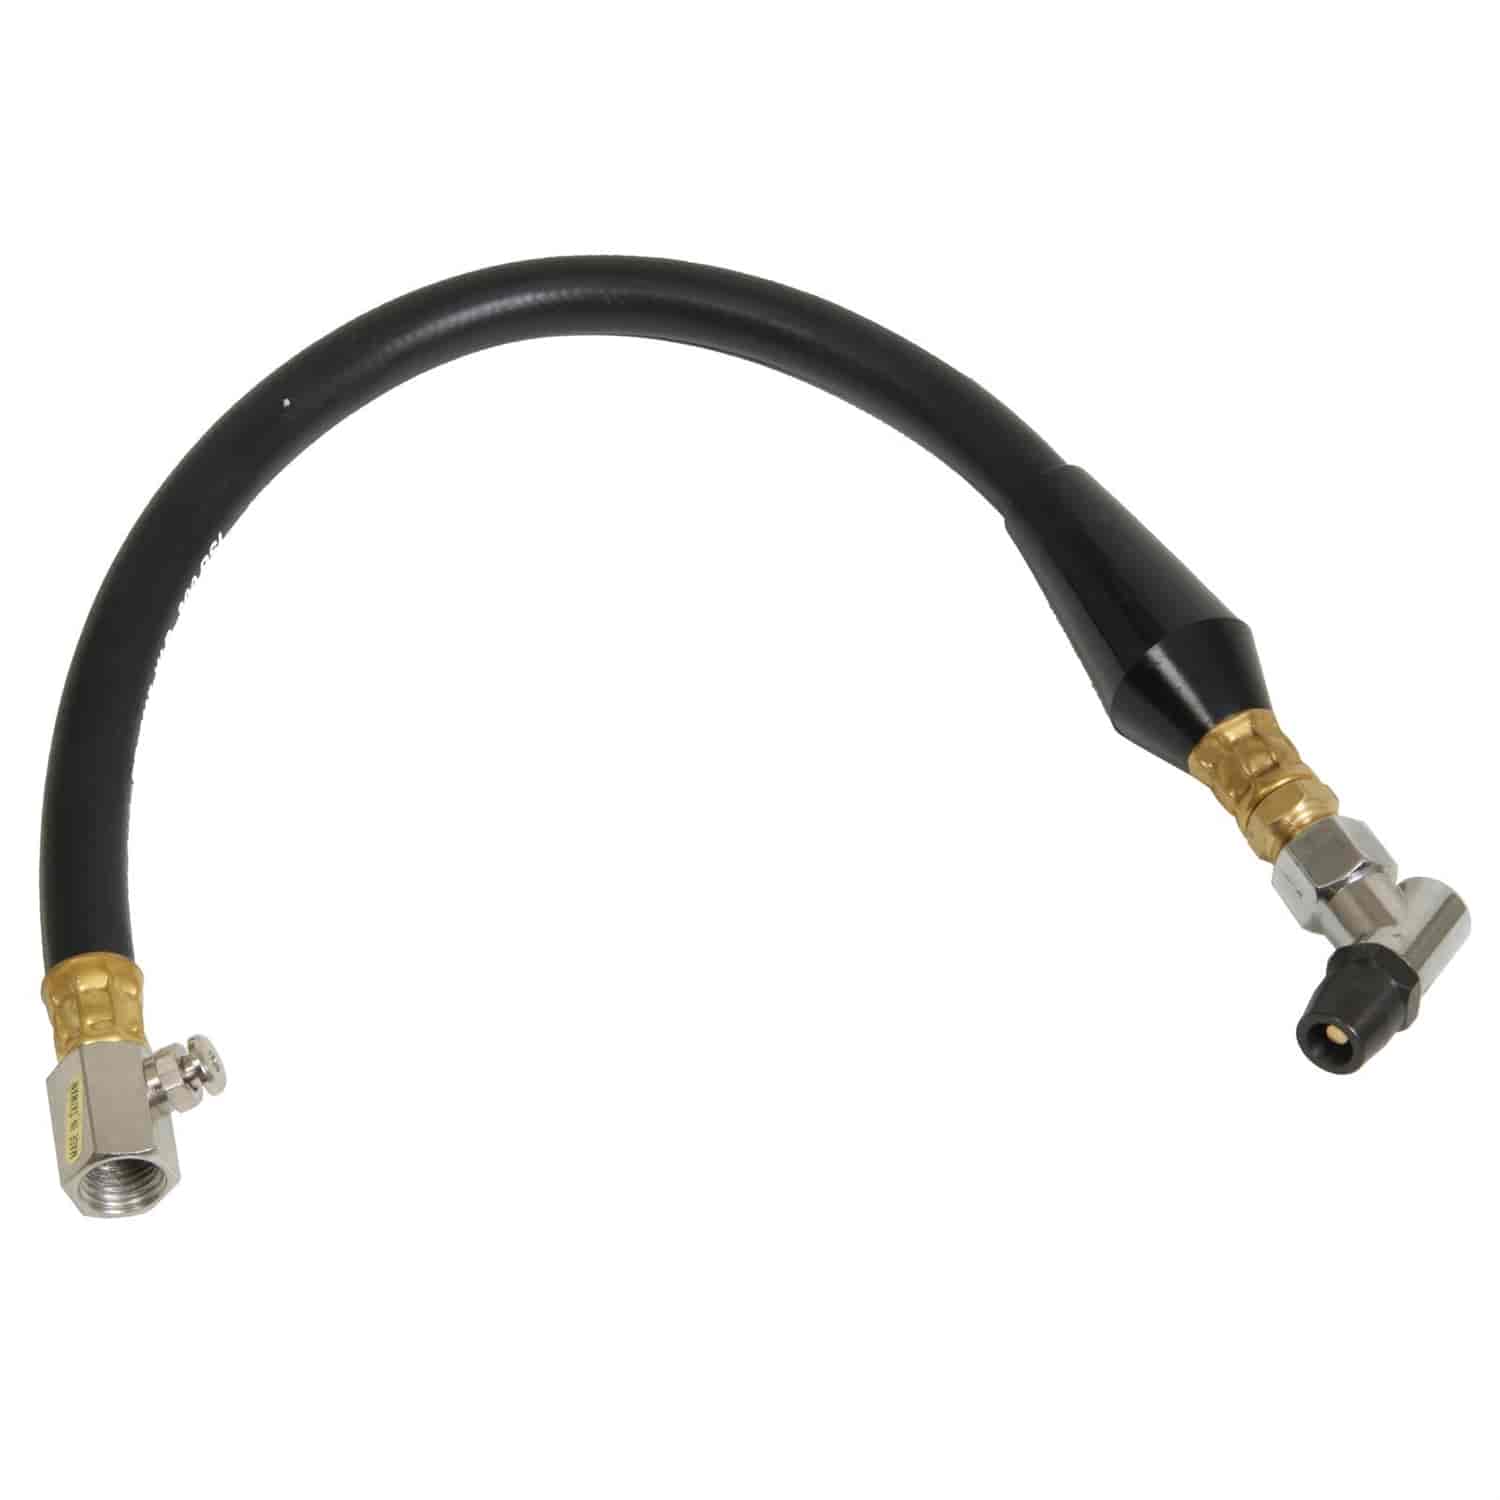 Replacement Hose For Tire Pressure Gauge